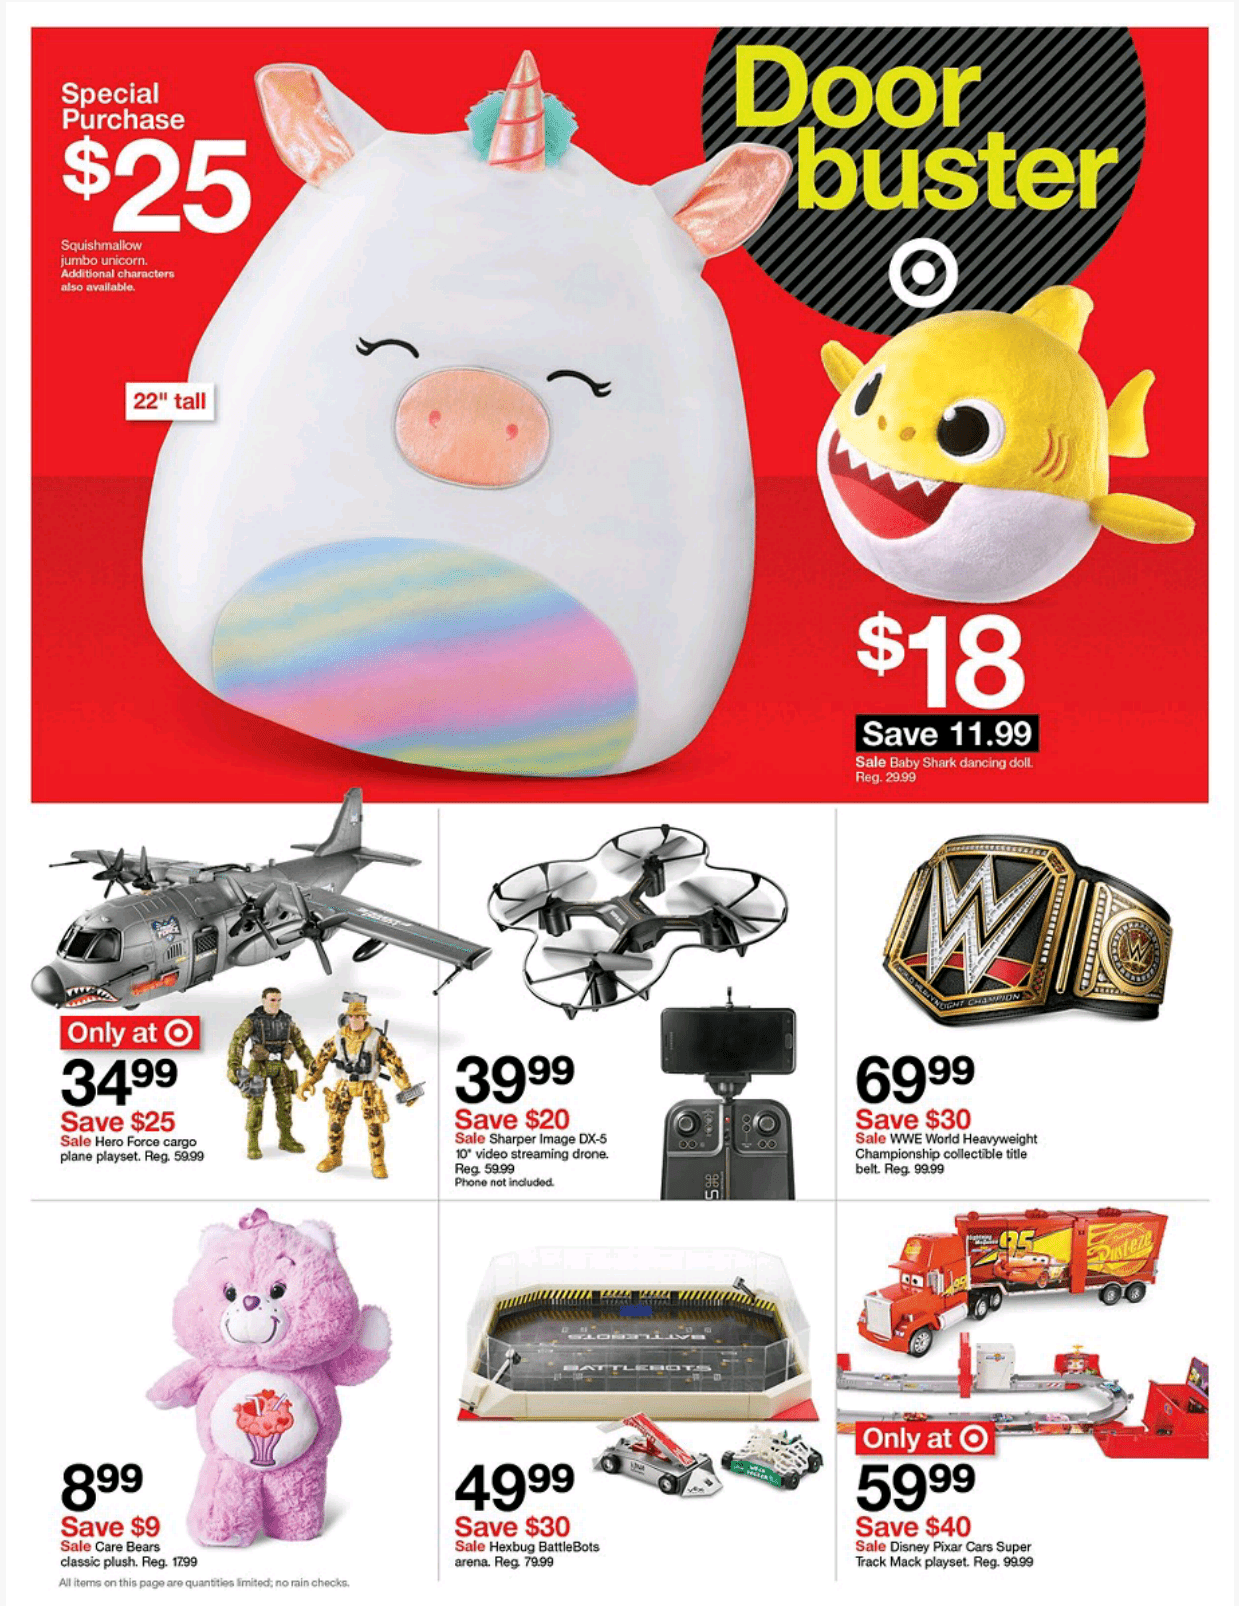 It’s Here! 2019 Target Black Friday Ad Preview - Page 6 of 13 - www.lvbagssale.com